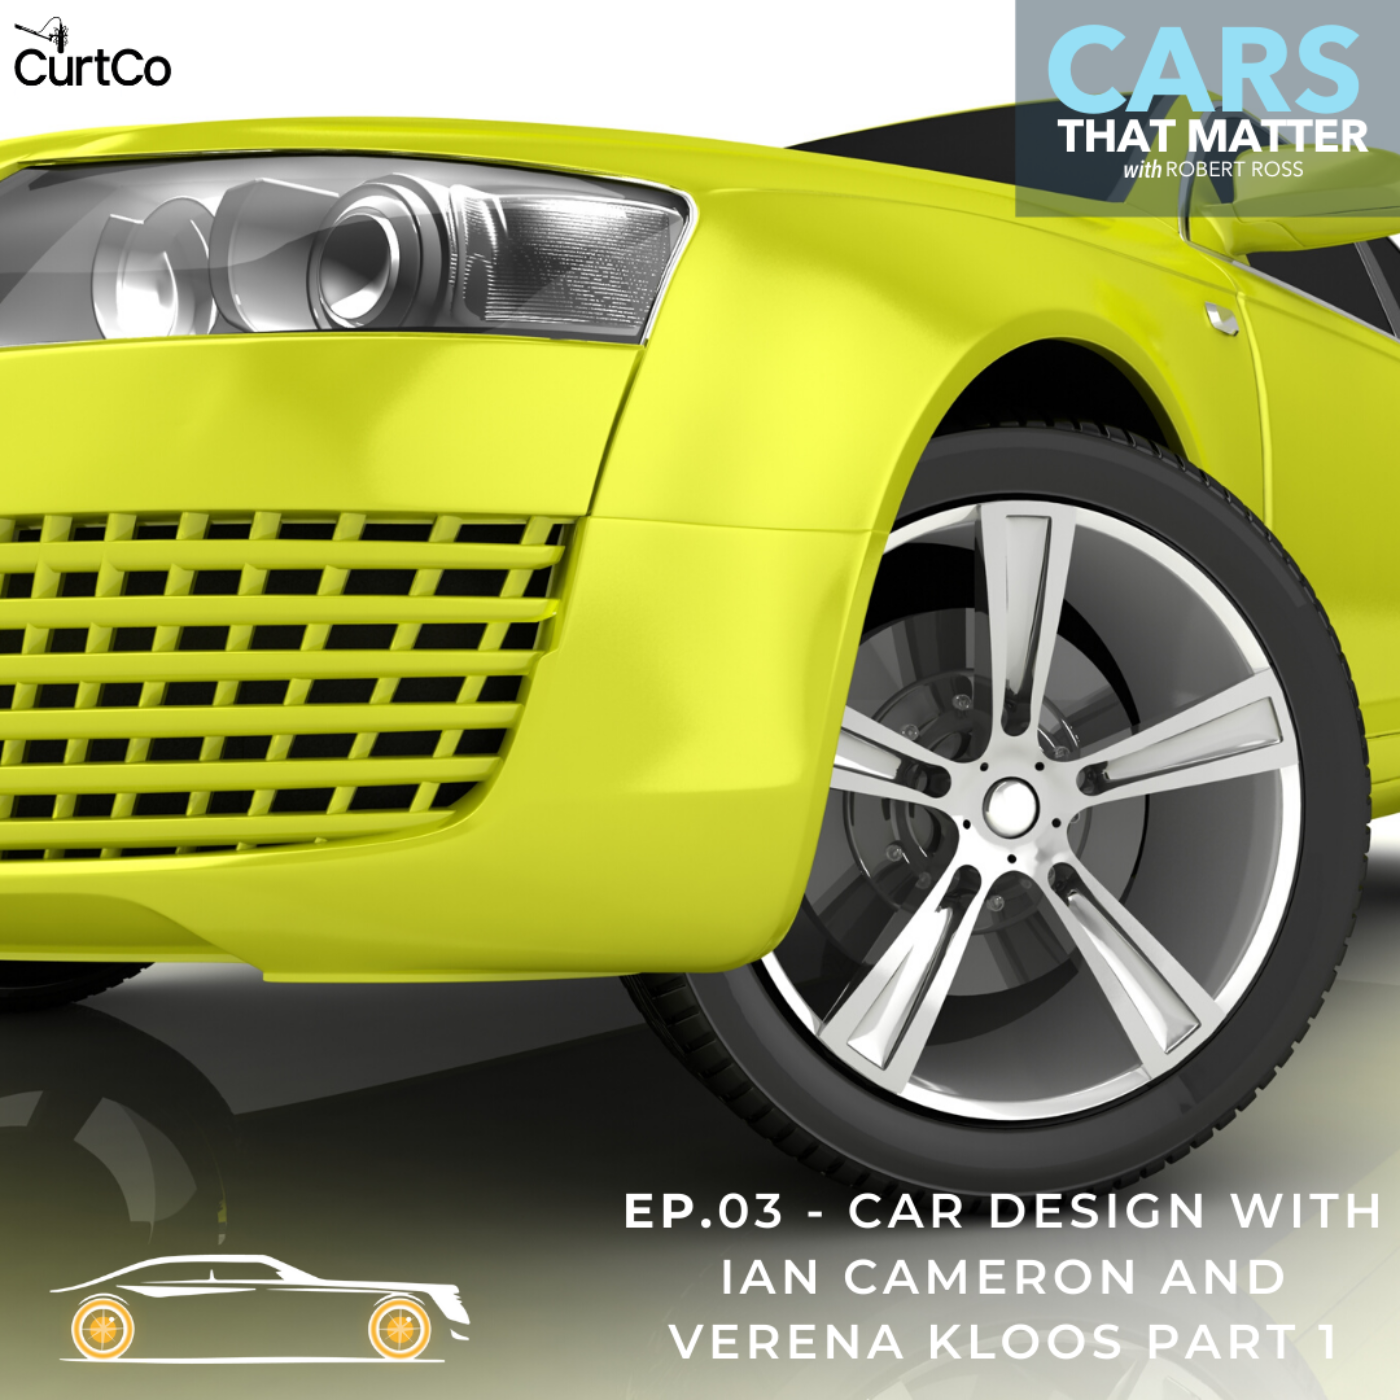 03 - Car Design with Ian Cameron and Verena Kloos Part 1 - Rolls Royce and Design Works